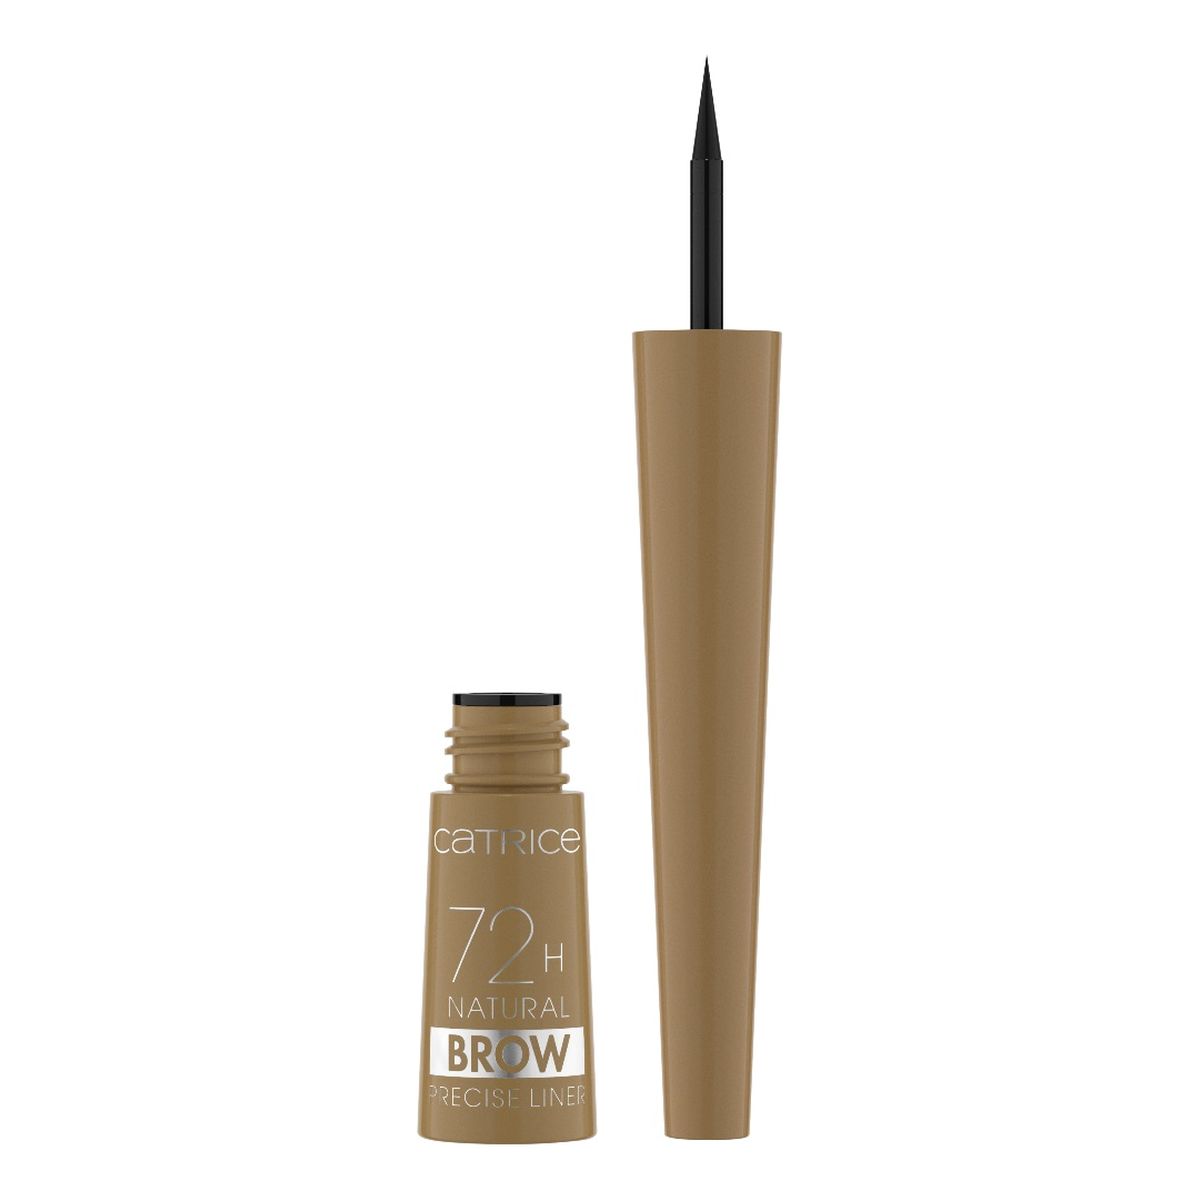 Catrice 72H Natural Brow Precise Liner do brwi 2ml